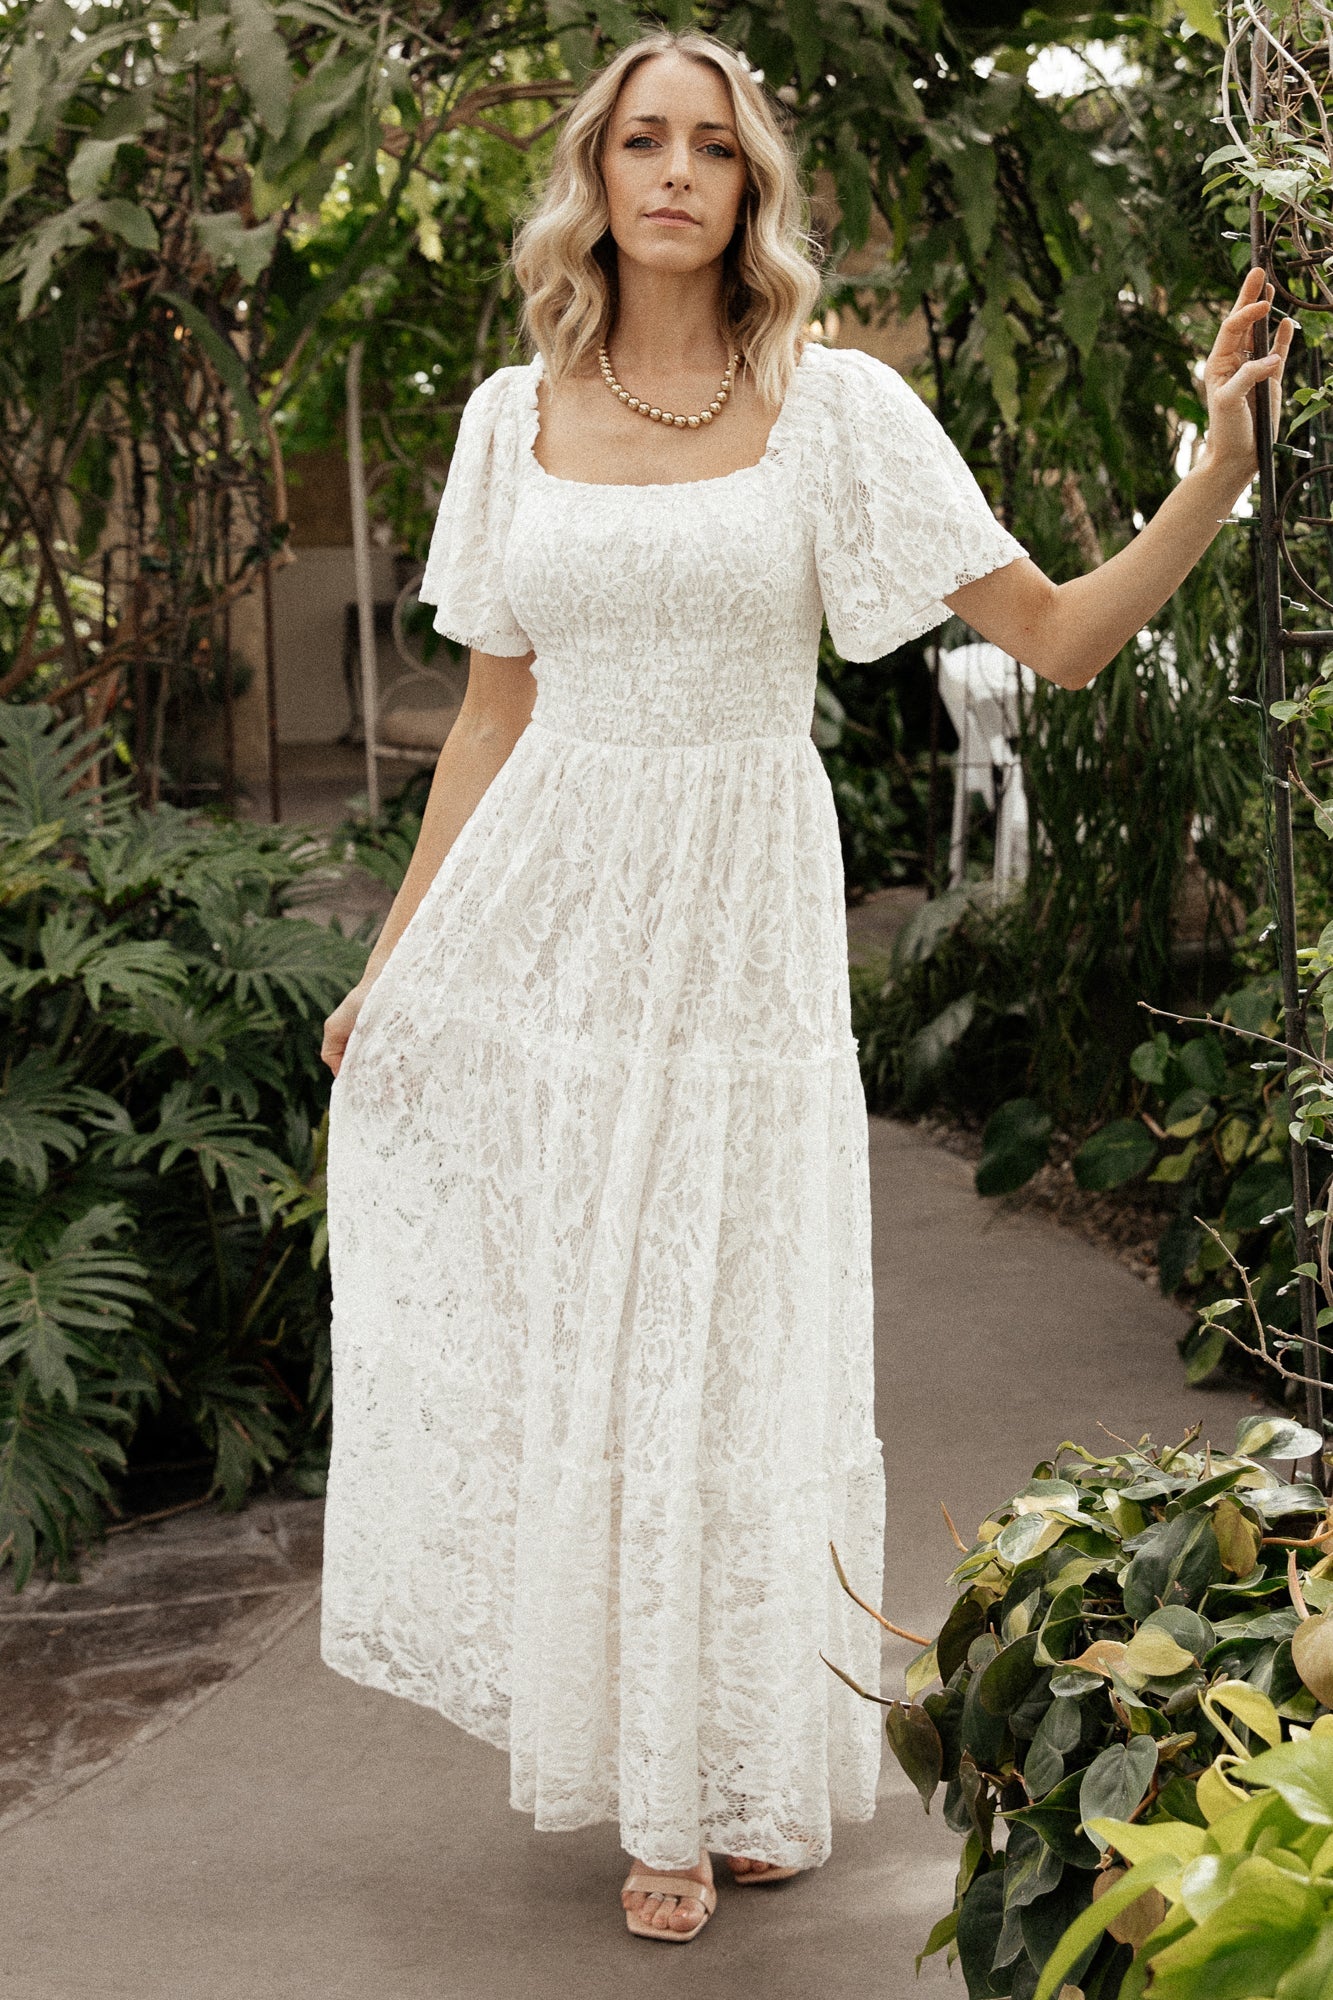 Love of Details White Lace Backless Maxi Dress  Maxi dress wedding, White lace  maxi dress, White lace maxi